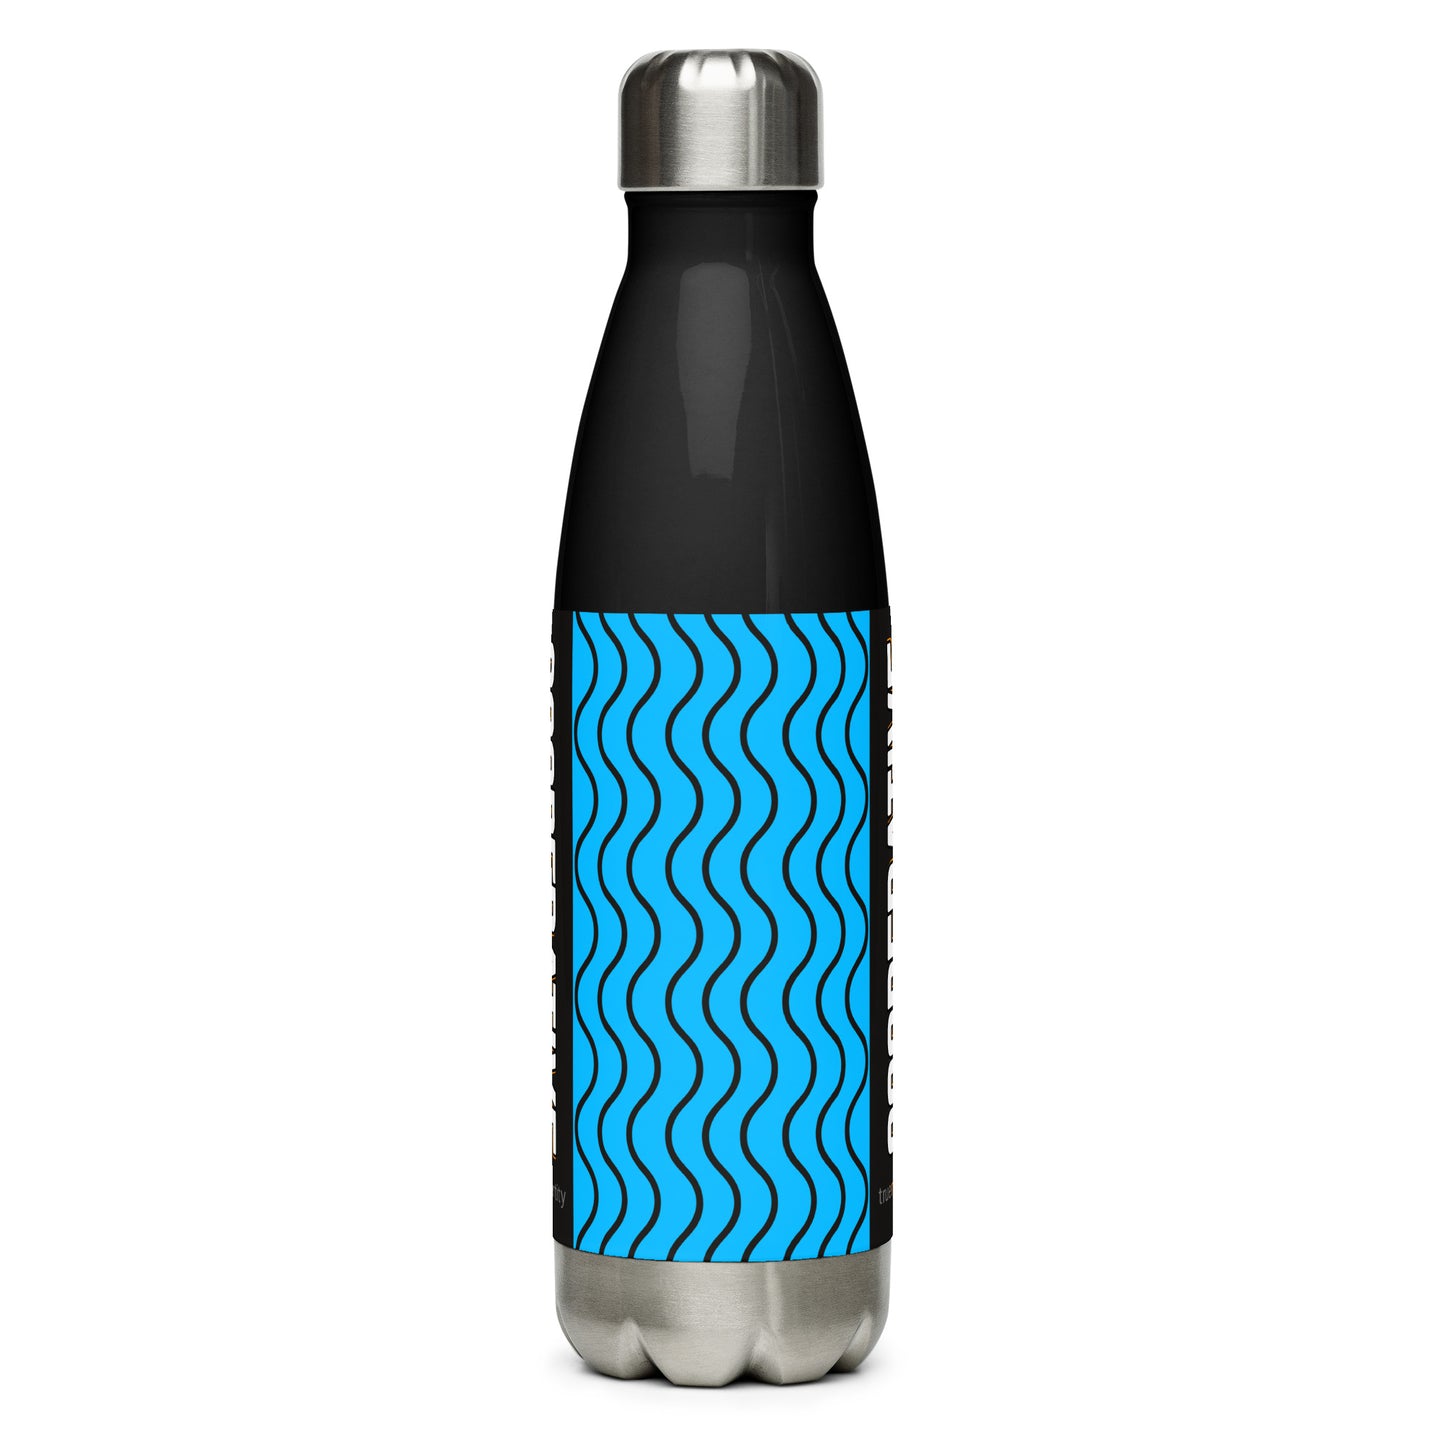 COOPERATIVE Stainless Steel Water Bottle Blue Wave Design, 17 oz, in Black or White